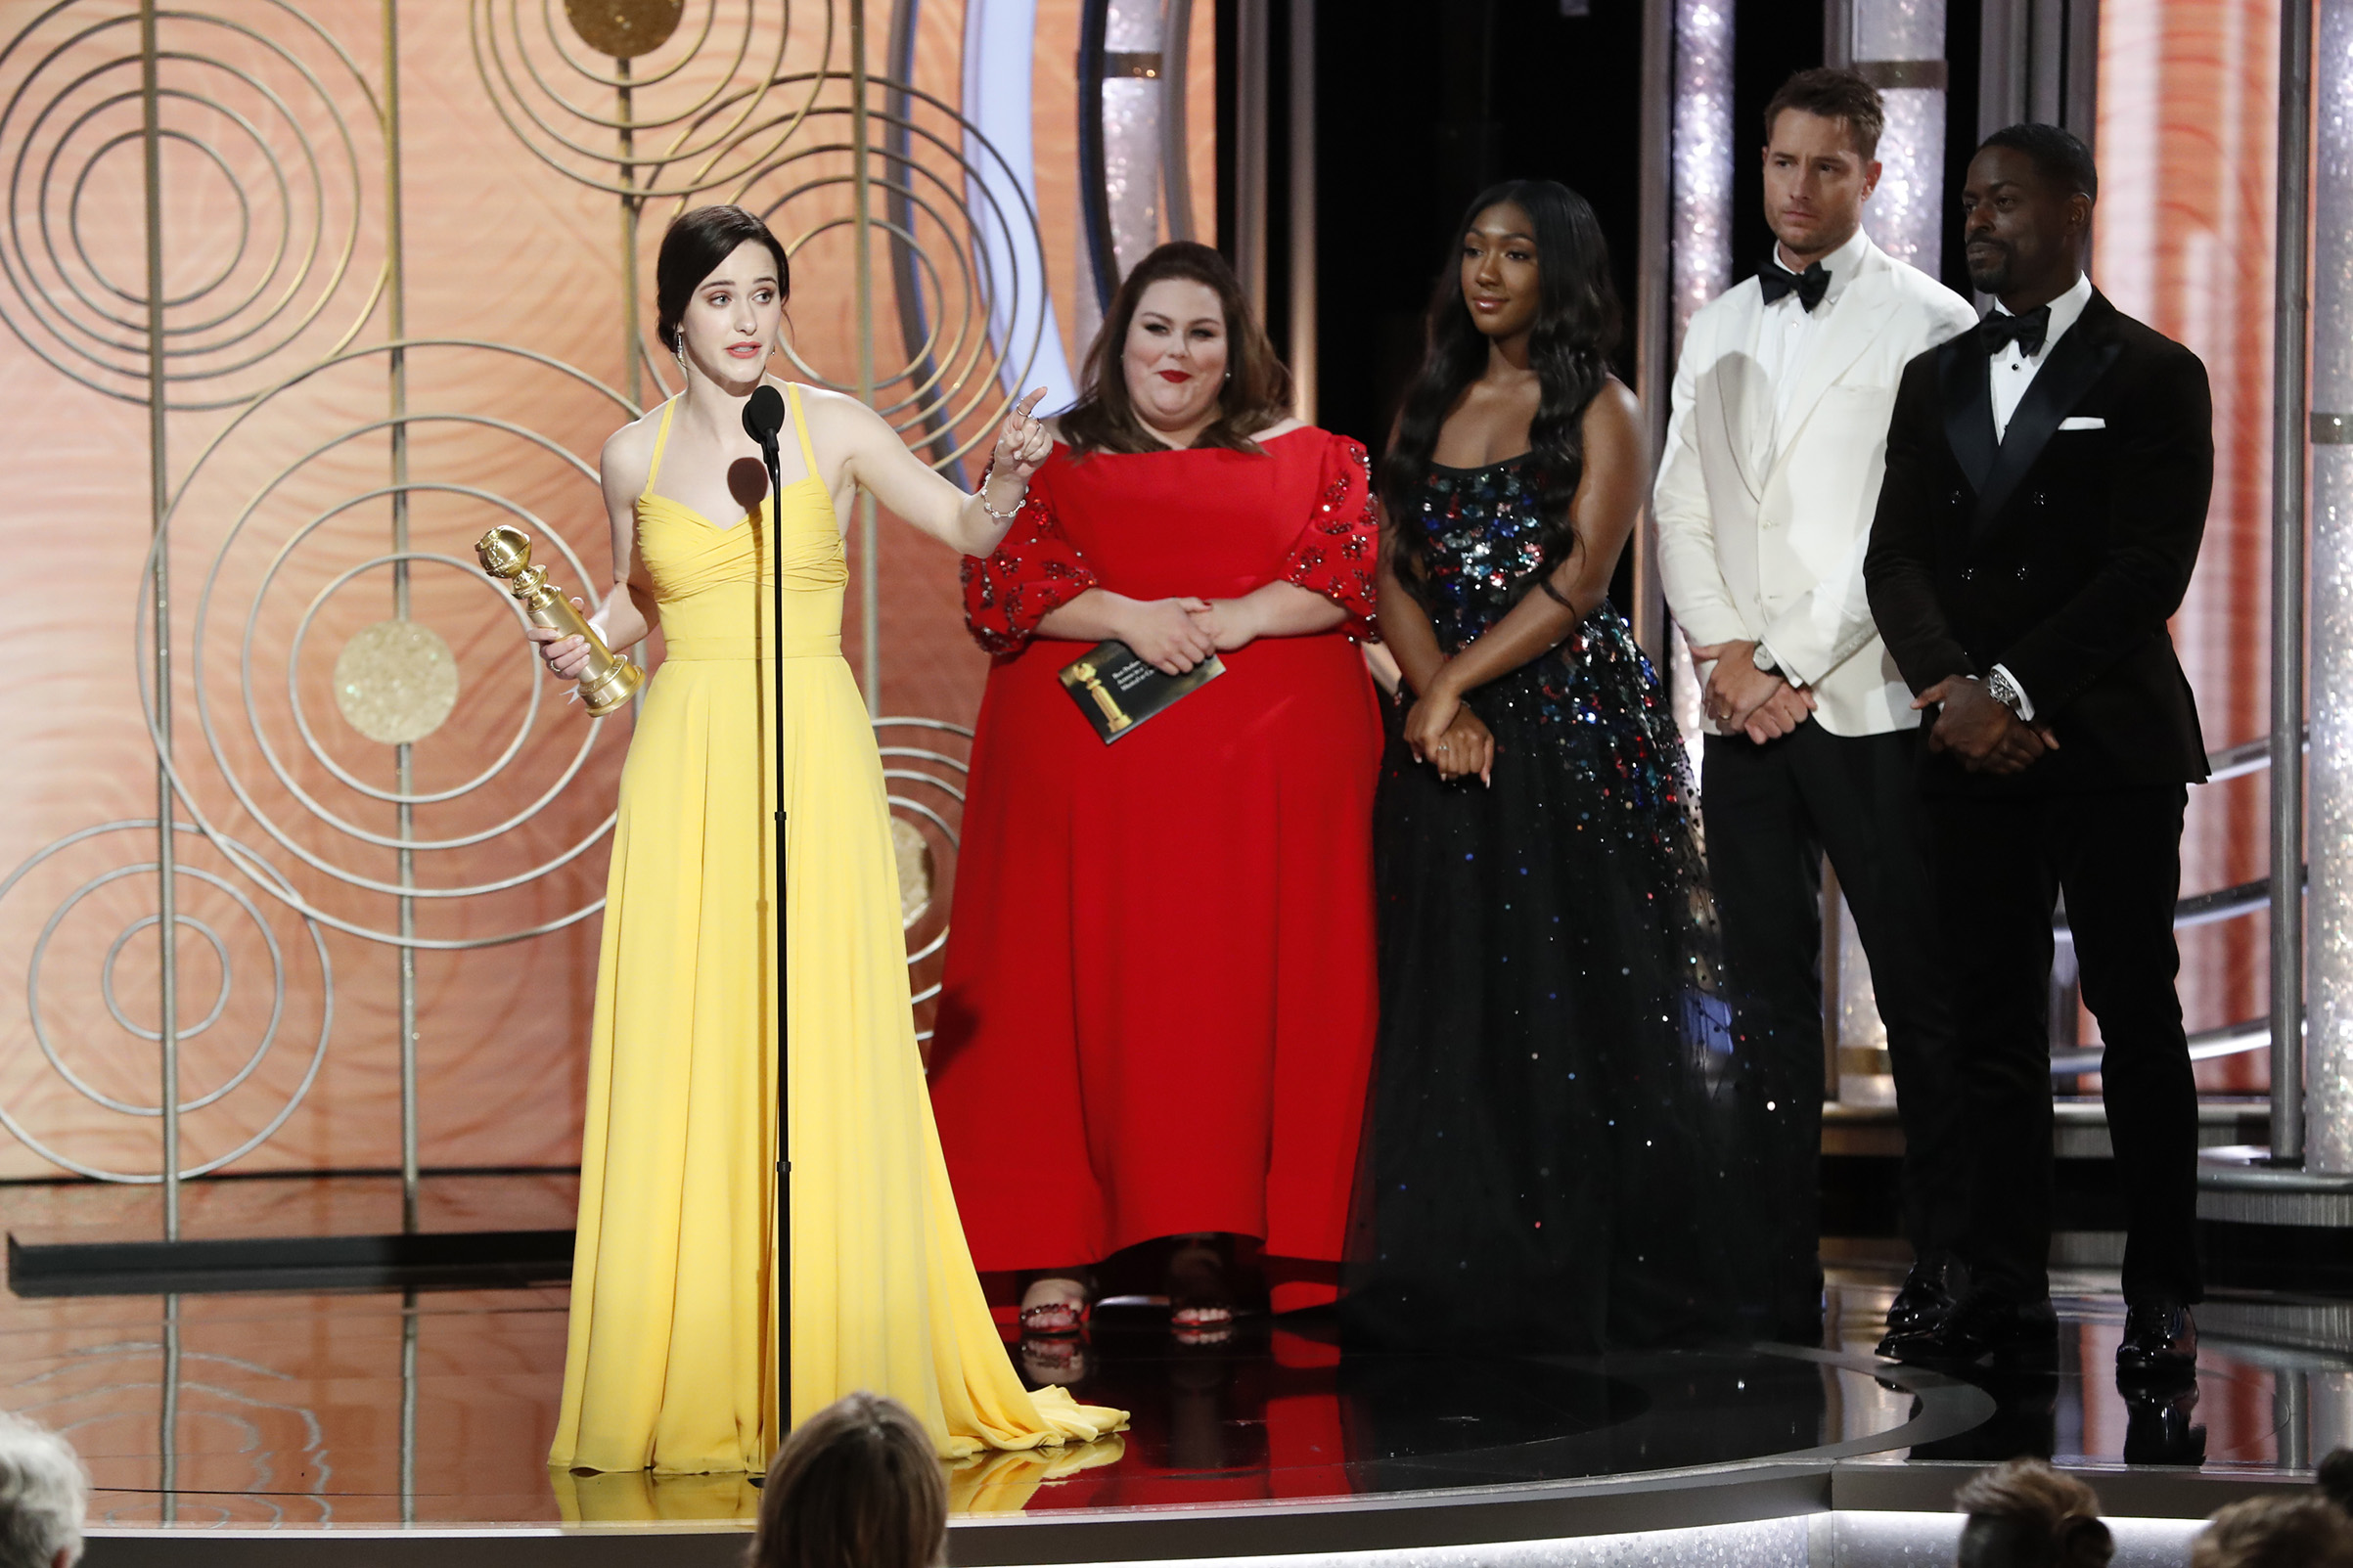 Rachel Brosnahan from “The Marvelous Mrs. Maisel” accepts the Best Performance by an Actress in a Television Series – Musical or Comedy award onstage during the 76th Annual Golden Globe Awards. (NBCUniversal/Getty Images)